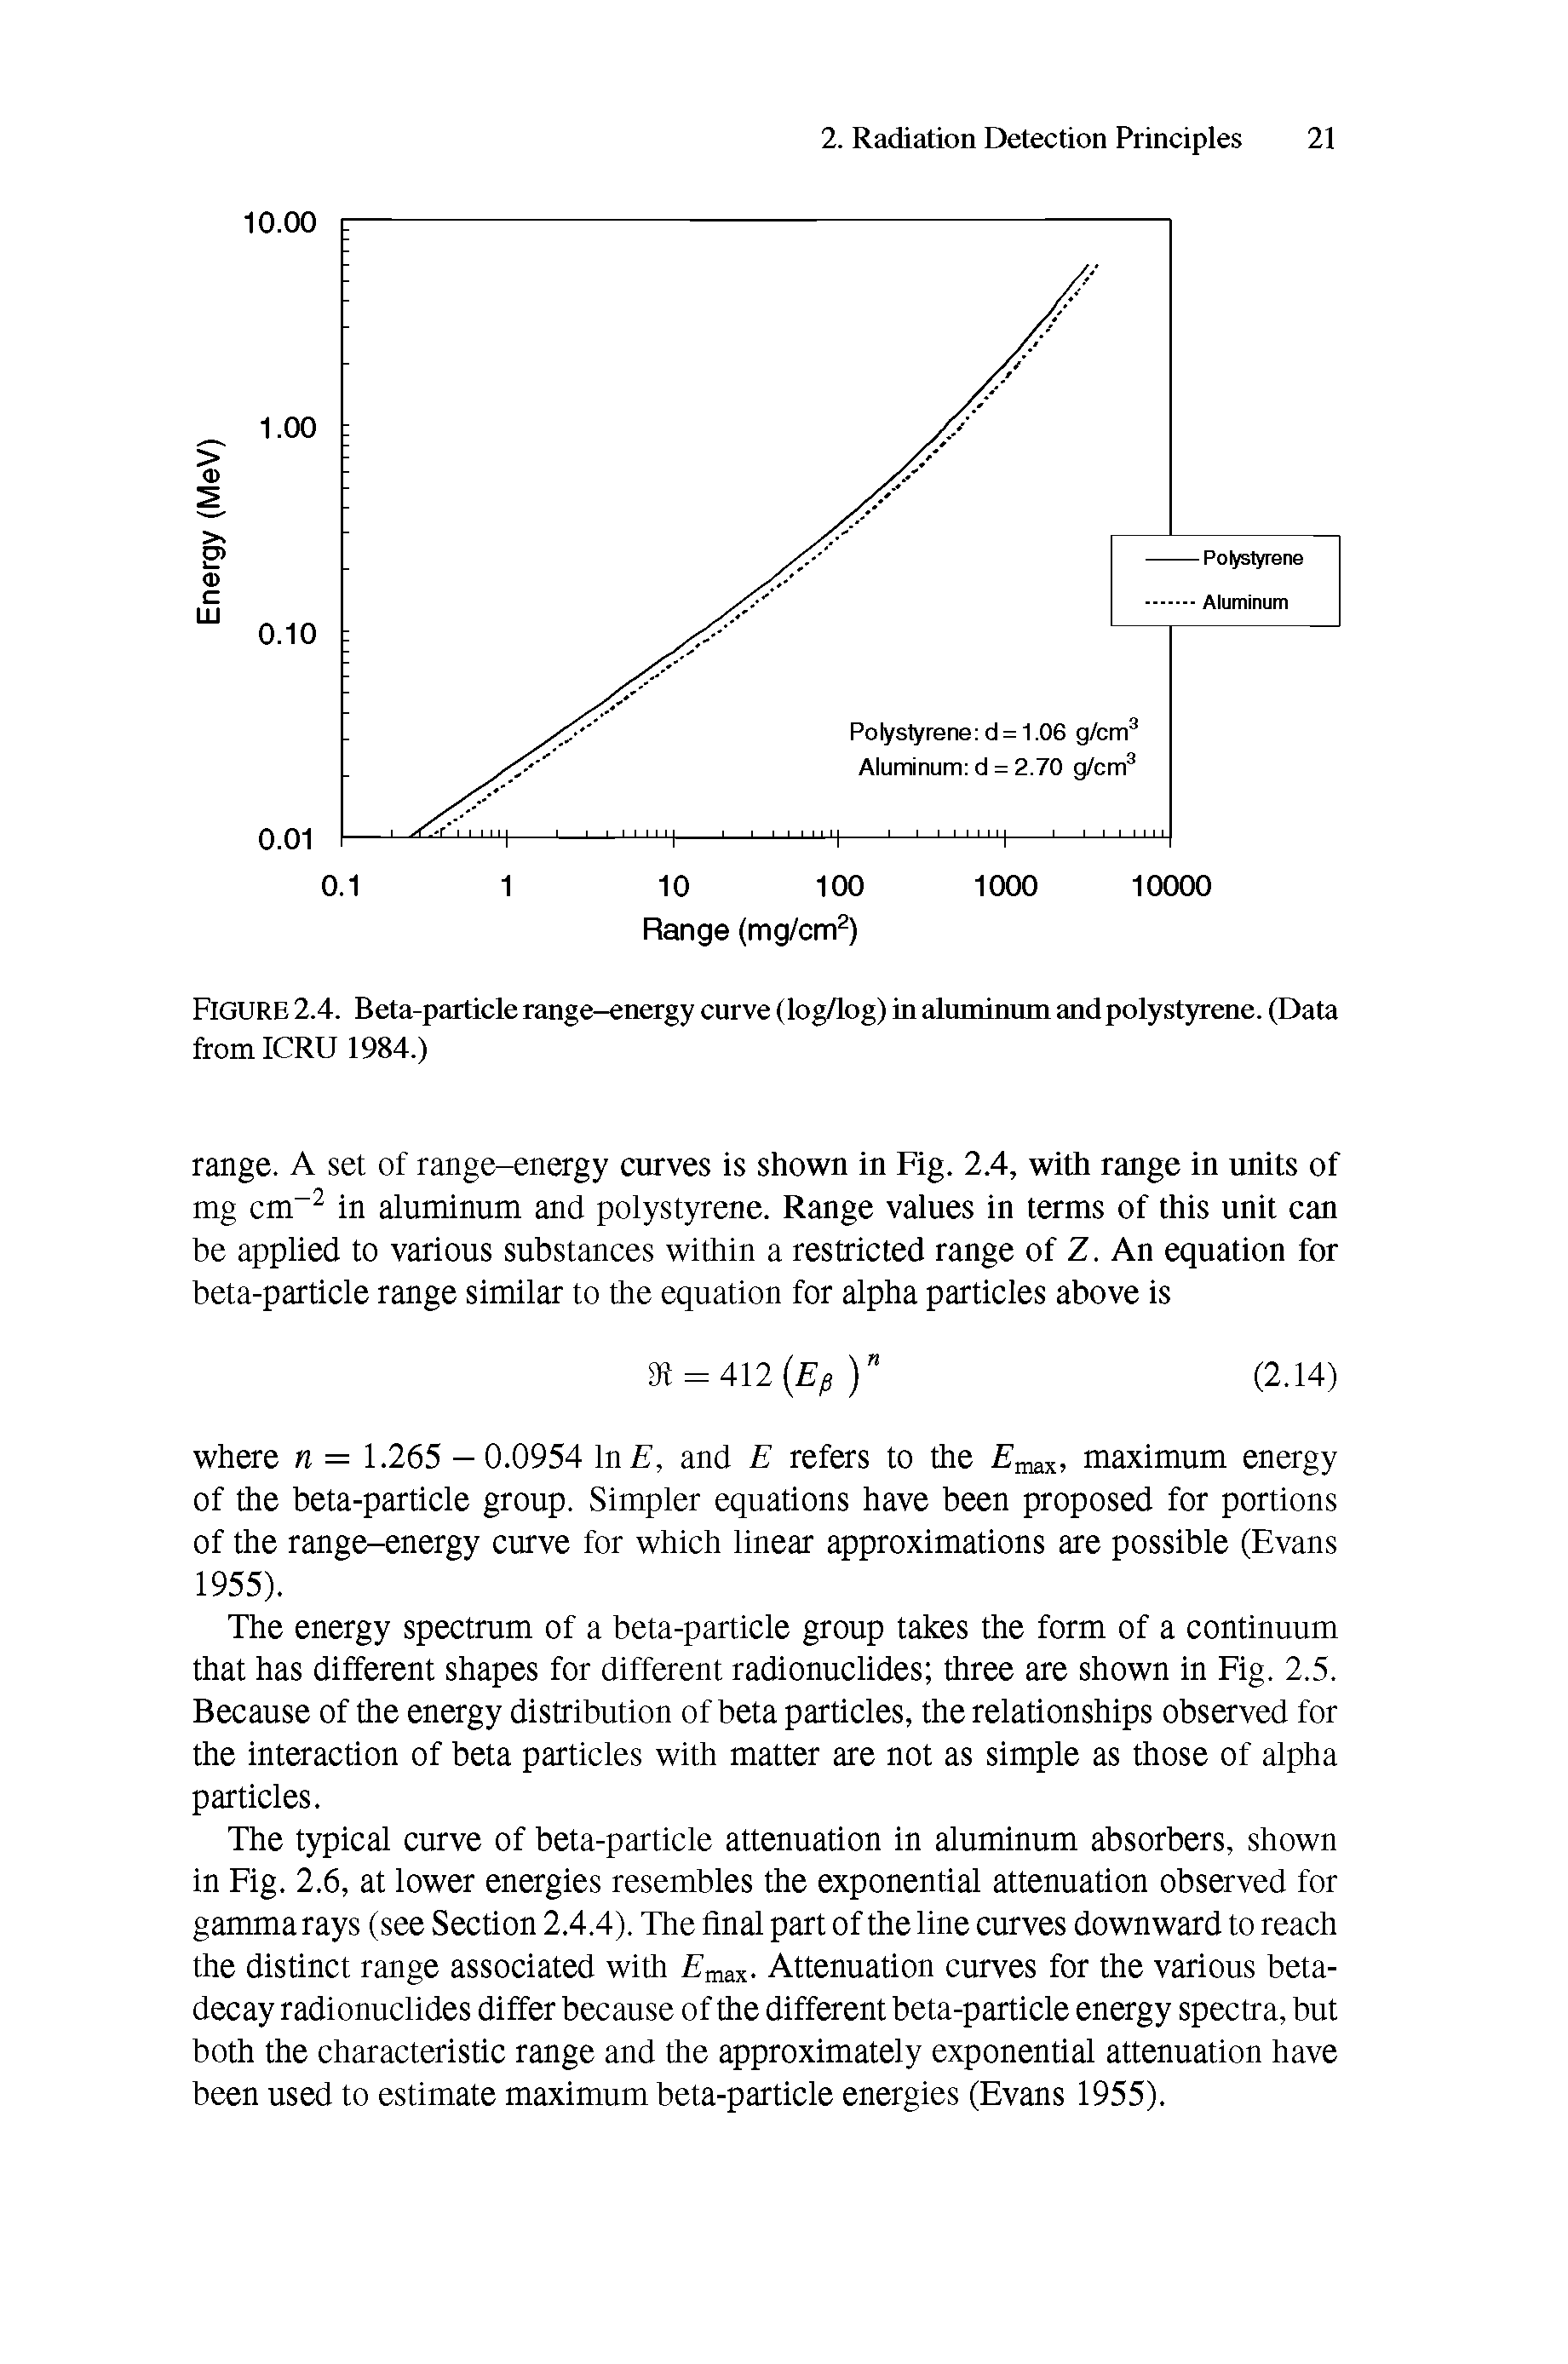 Figure 2.4. Beta-particle range-energy curve (log/log) in aluminum and polystyrene. (Data from ICRU 1984.)...